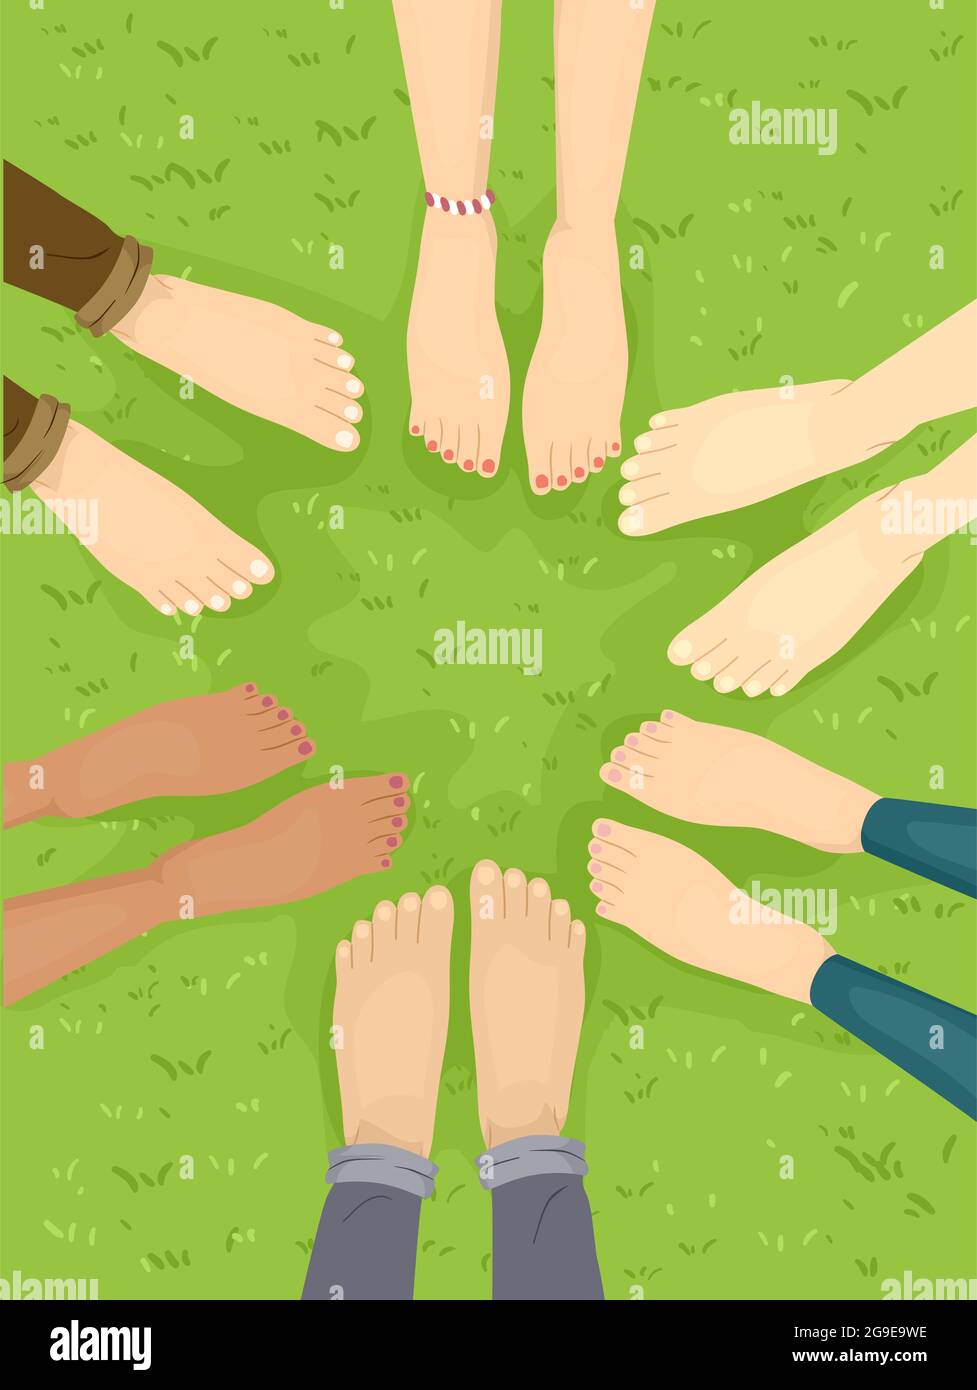 Illustration of Girls Friends Feet Sitting In a Circle Barefoot, Grounding on Grass Stock Photo